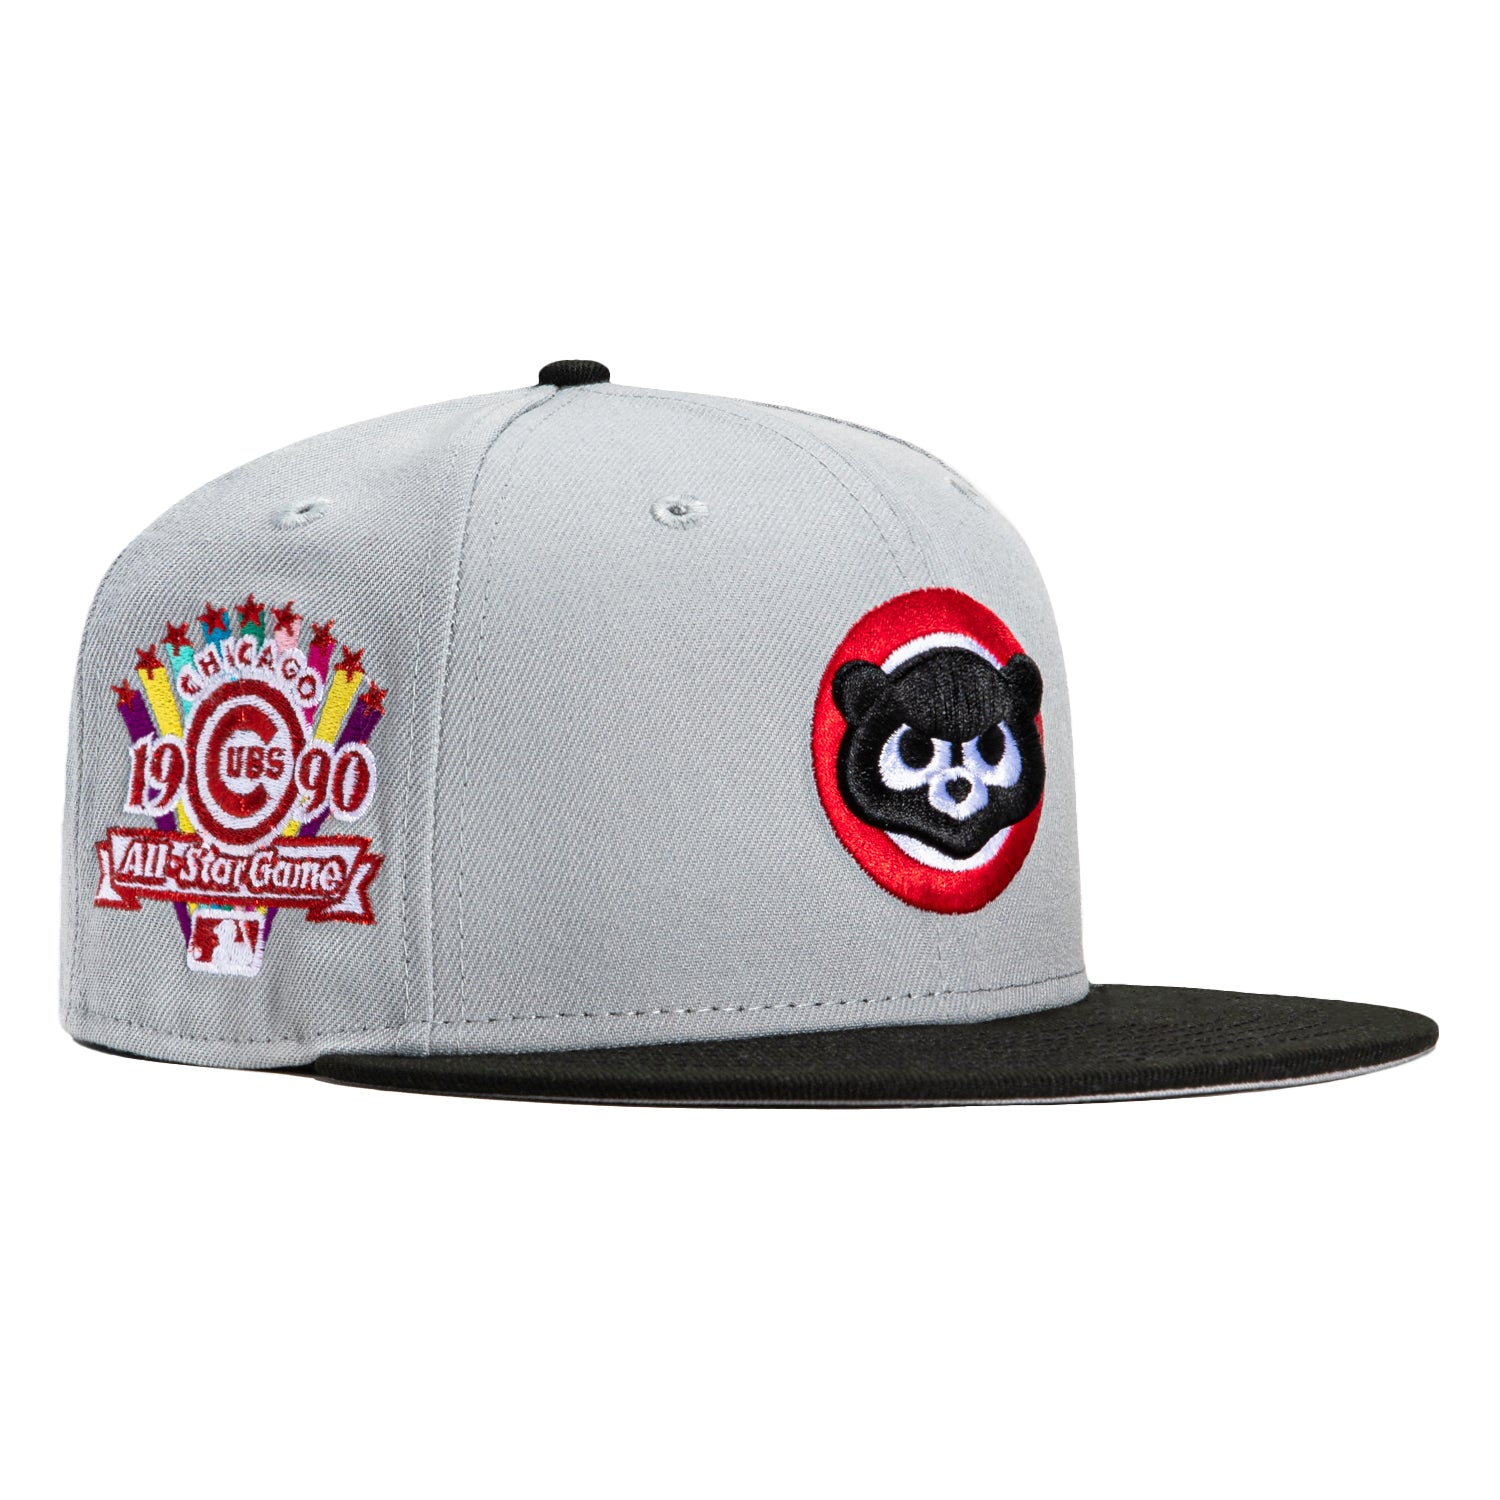 New Era 59Fifty Chicago Cubs 1990 All Star Game Patch Hat - Grey, Blac –  Hat Club